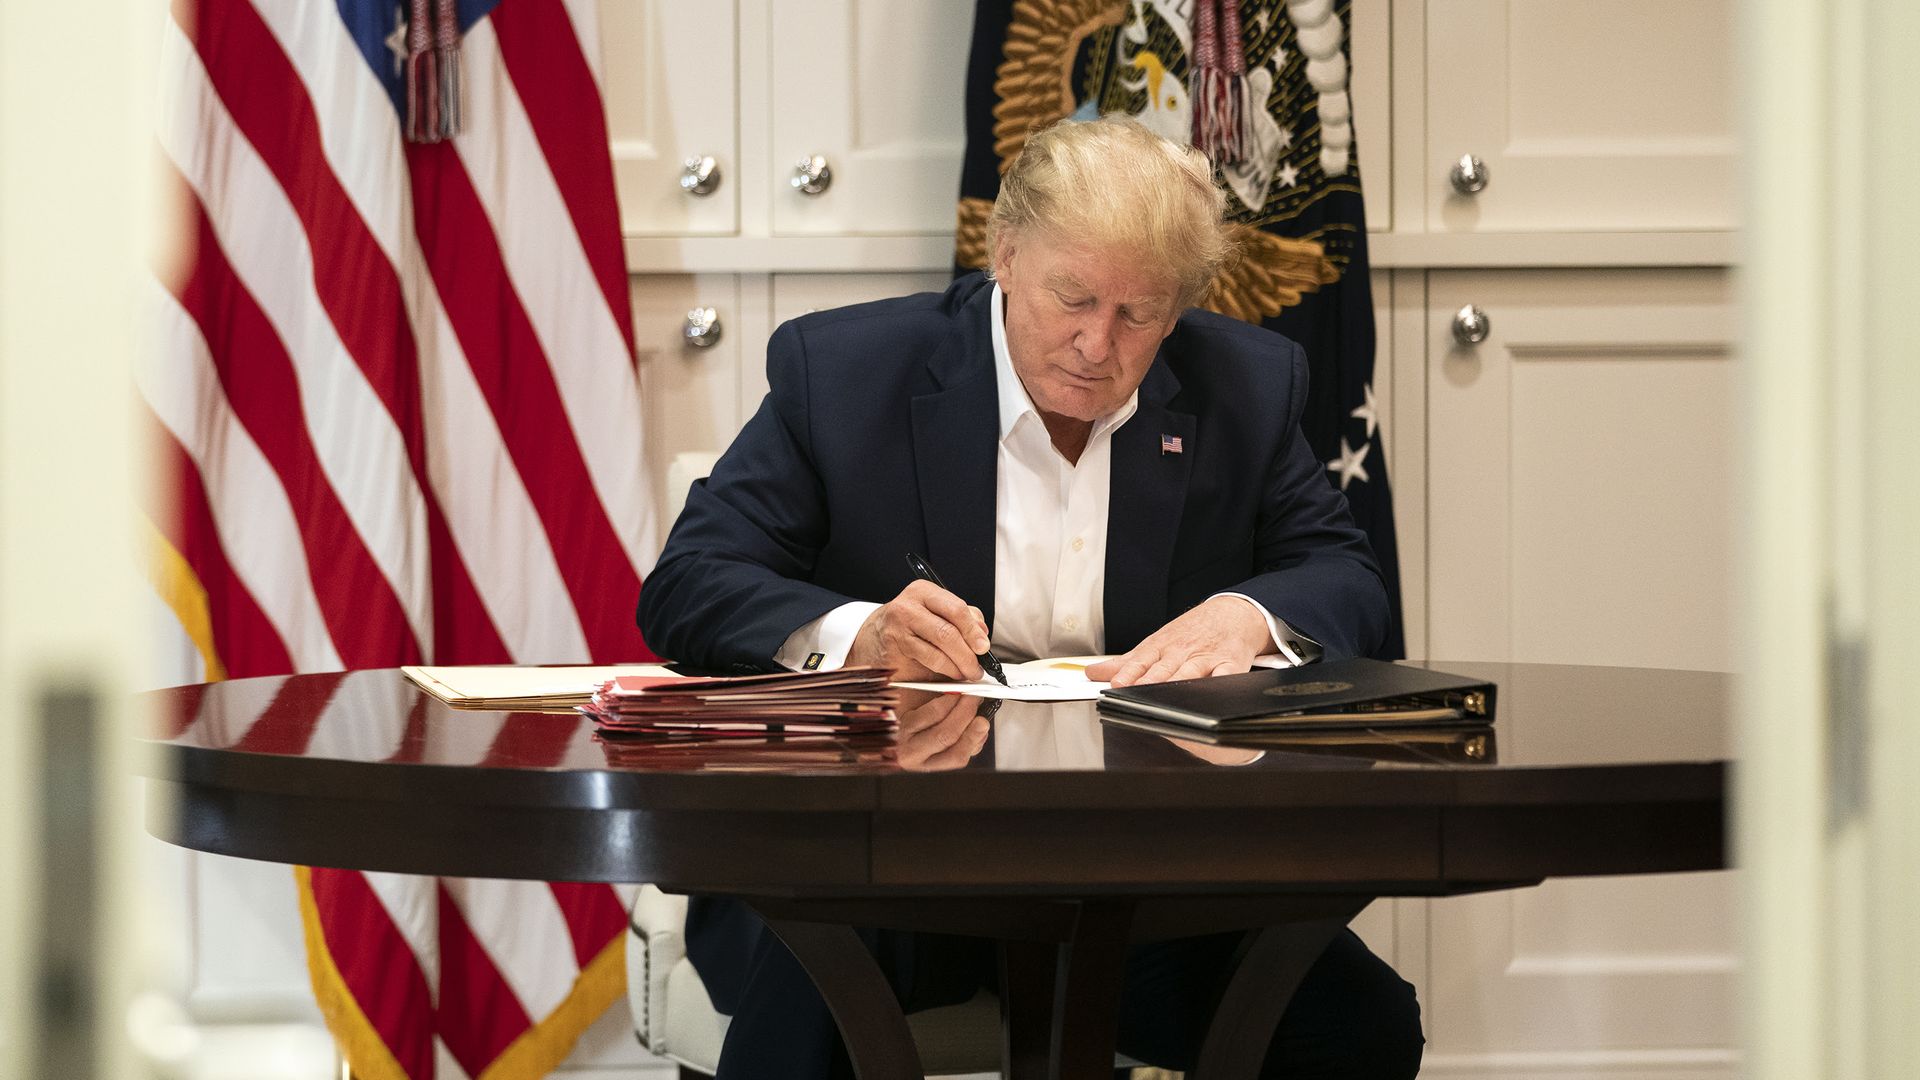 President Trump works in the Presidential Suite at Walter Reed National Military Medical Center in Bethesda, Md. Saturday, Oct. 3, 2020, after testing positive for COVID-19. 